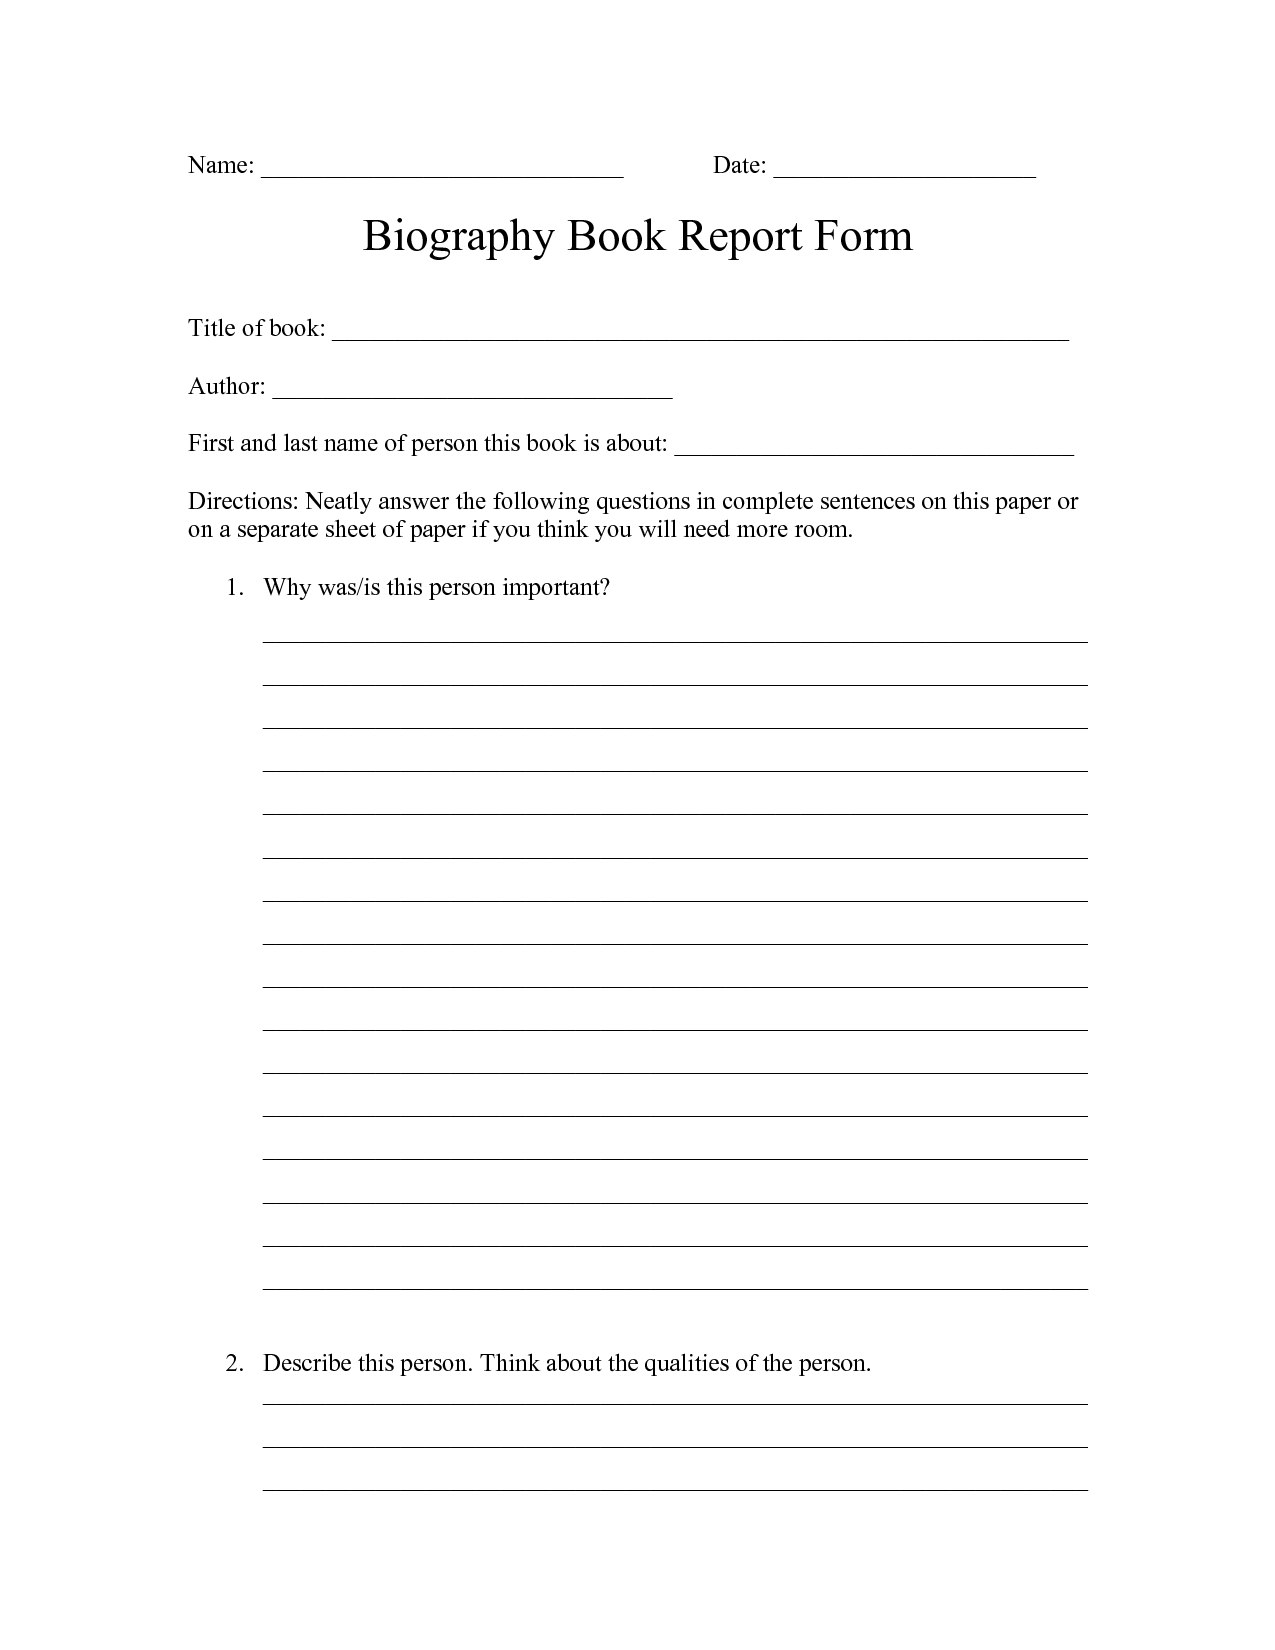 8 Best Images Of Biography Book Report Form Printable 4th Grade Biography Book Report